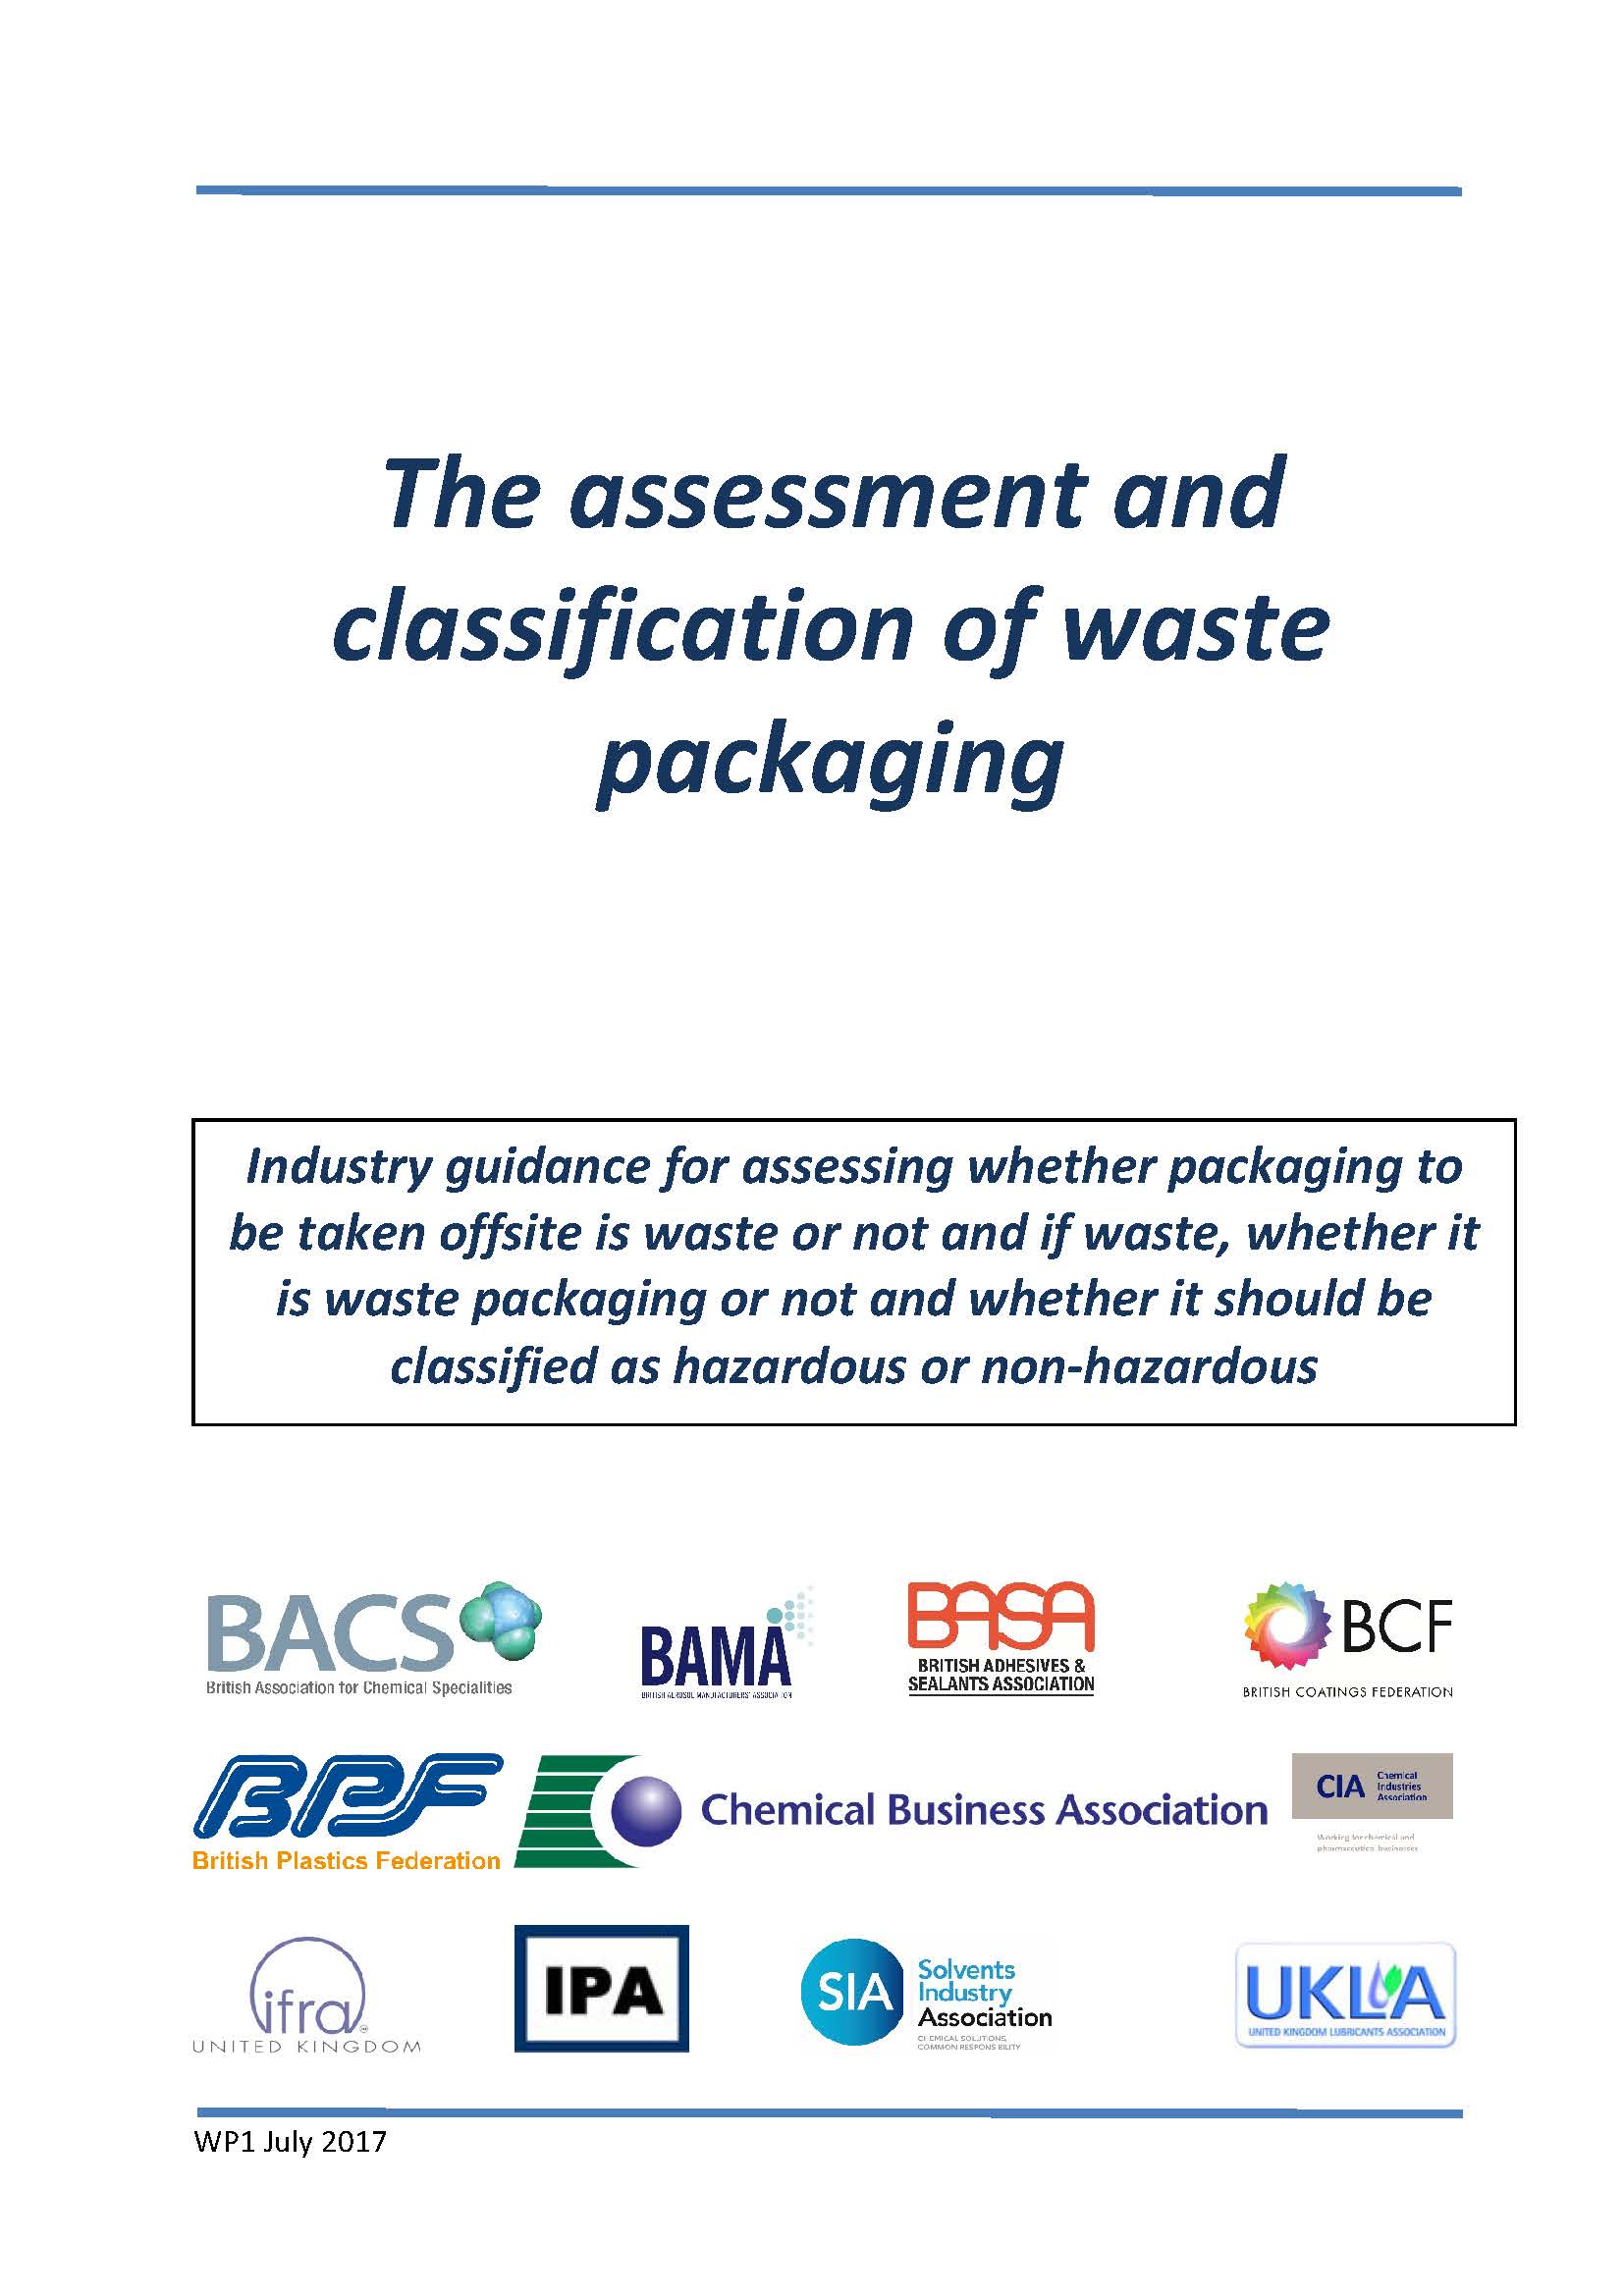 The Assessment and Classification of Waste Packaging